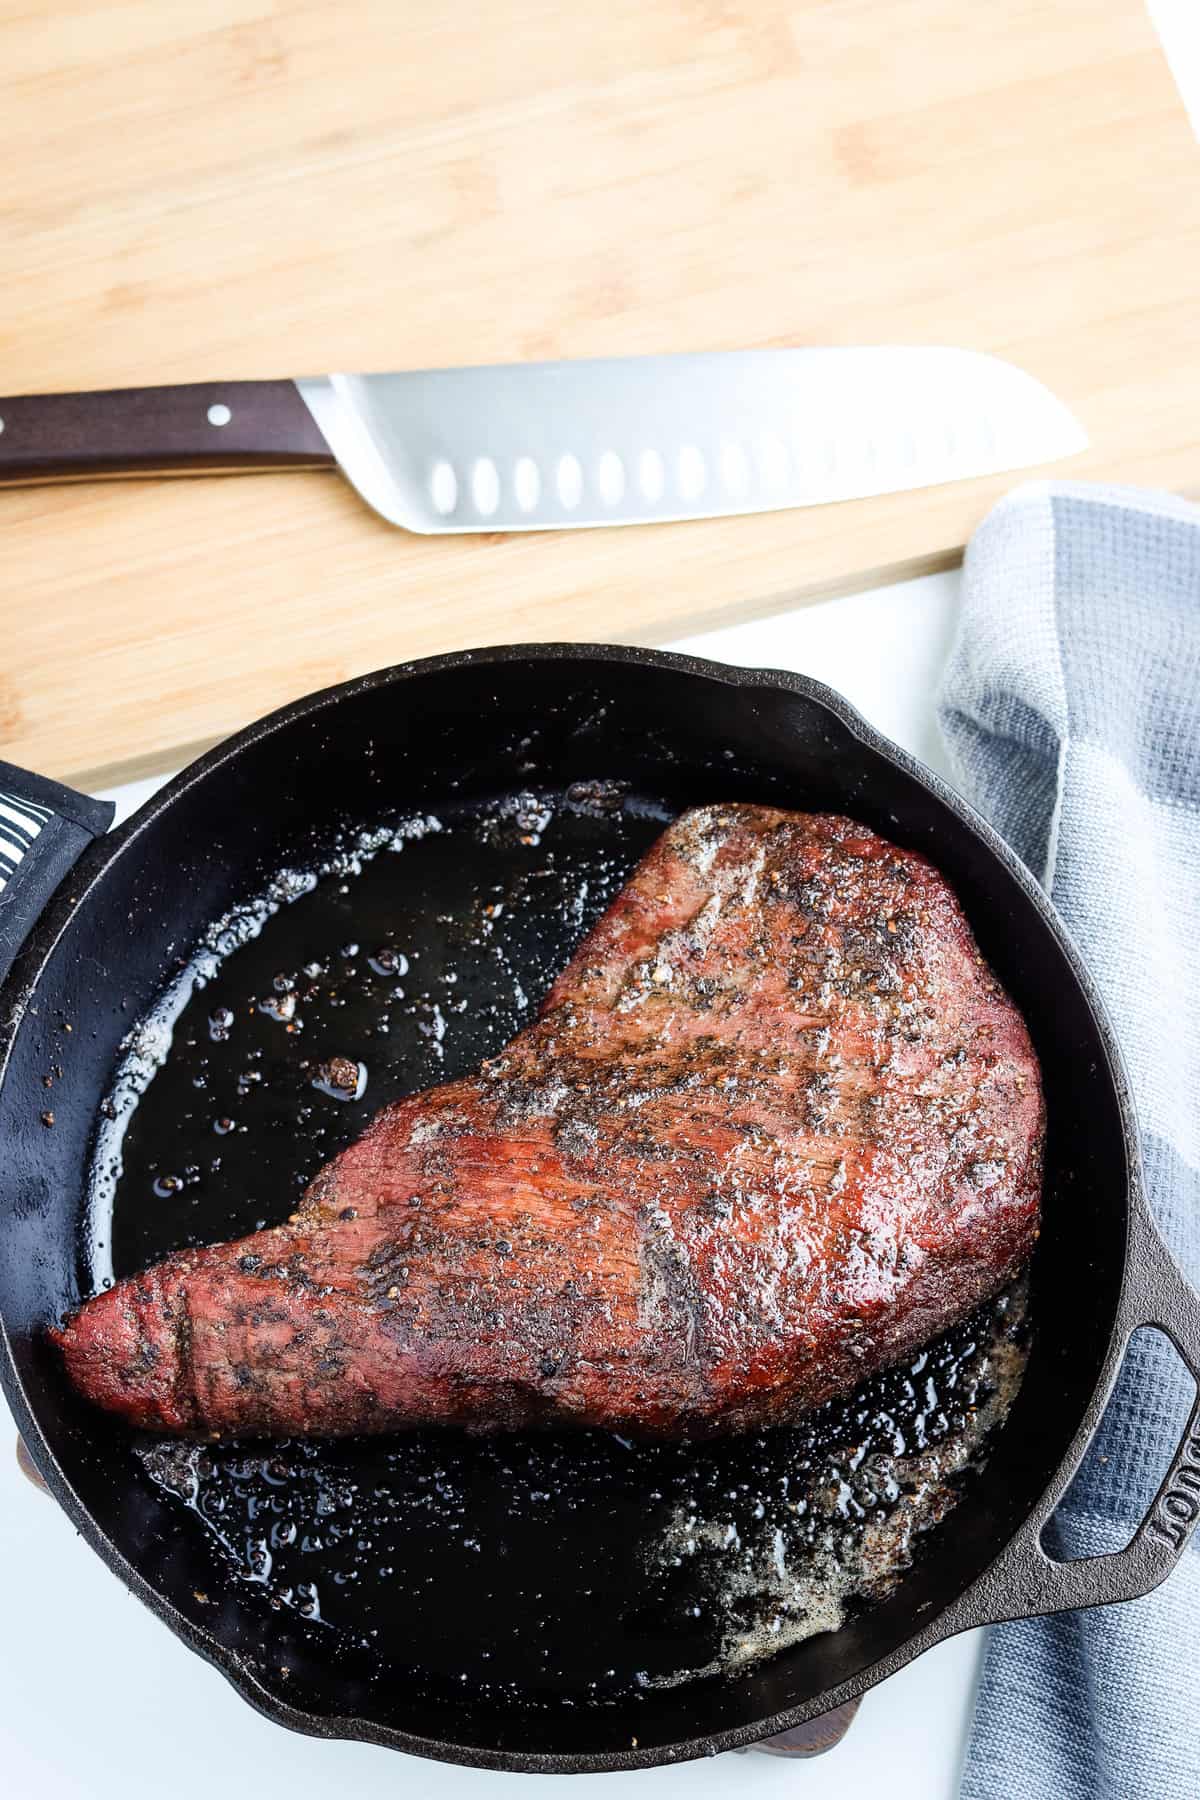 Searing tri tip in cast iron skillet